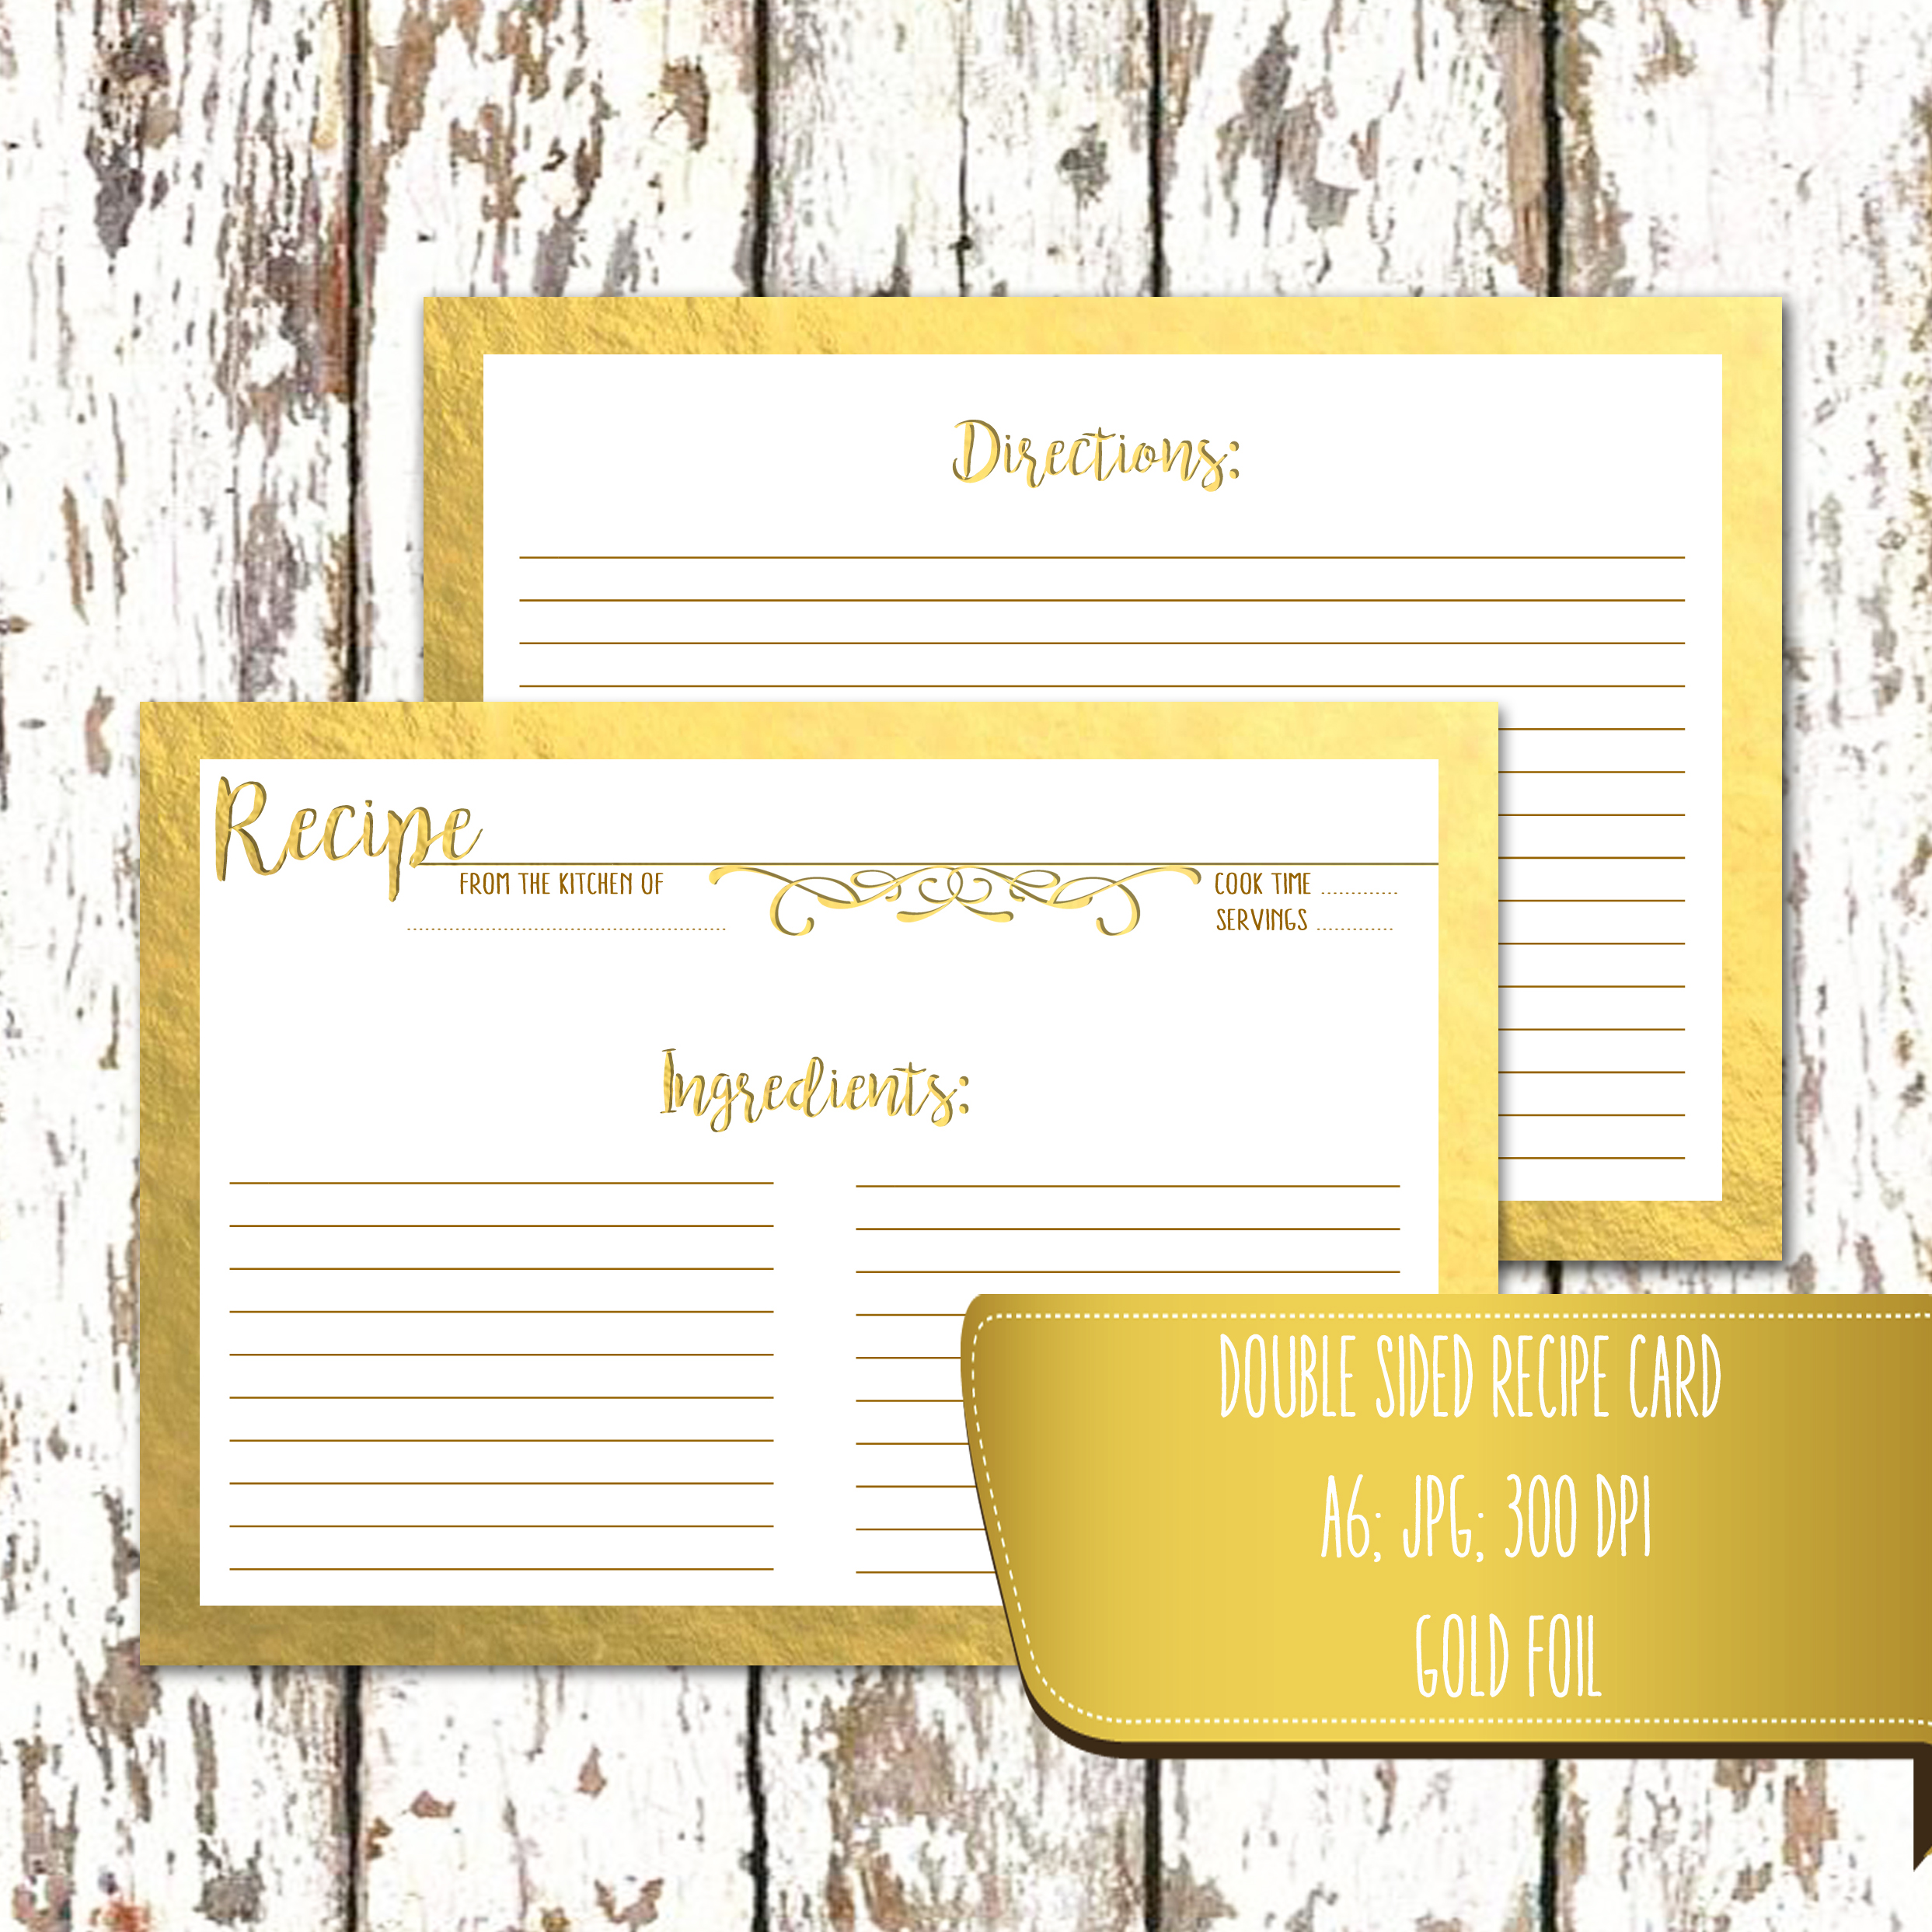 recipe-card-double-sided-a6-printable-recipe-card-gold-foil-kitchen